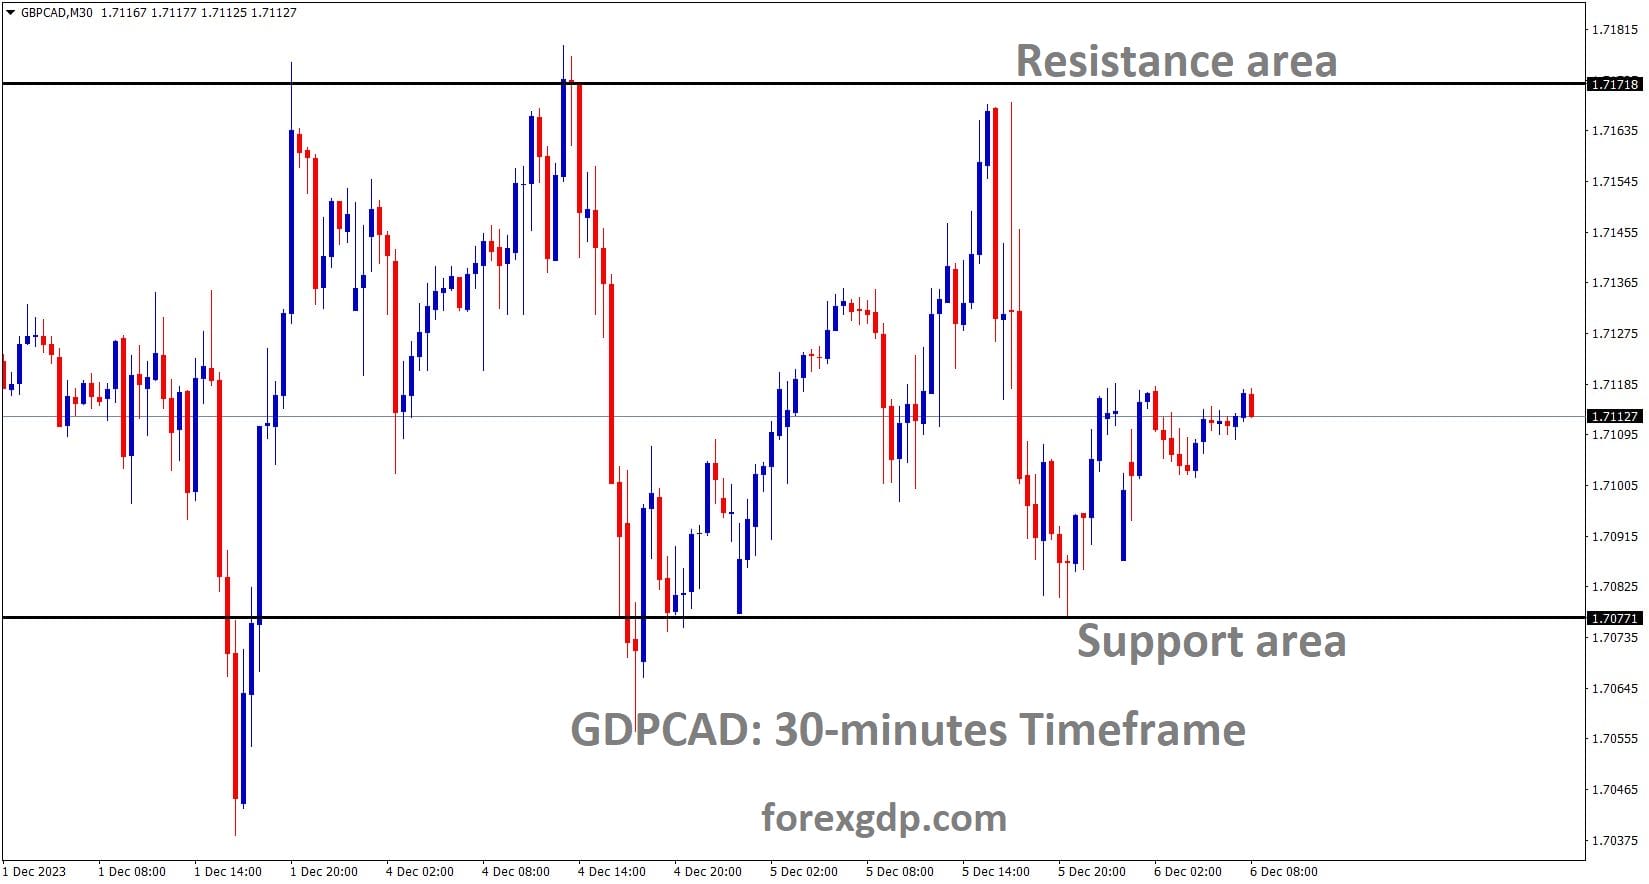 GBPCAD is moving in the Box pattern and the market has rebounded from the support area of the pattern